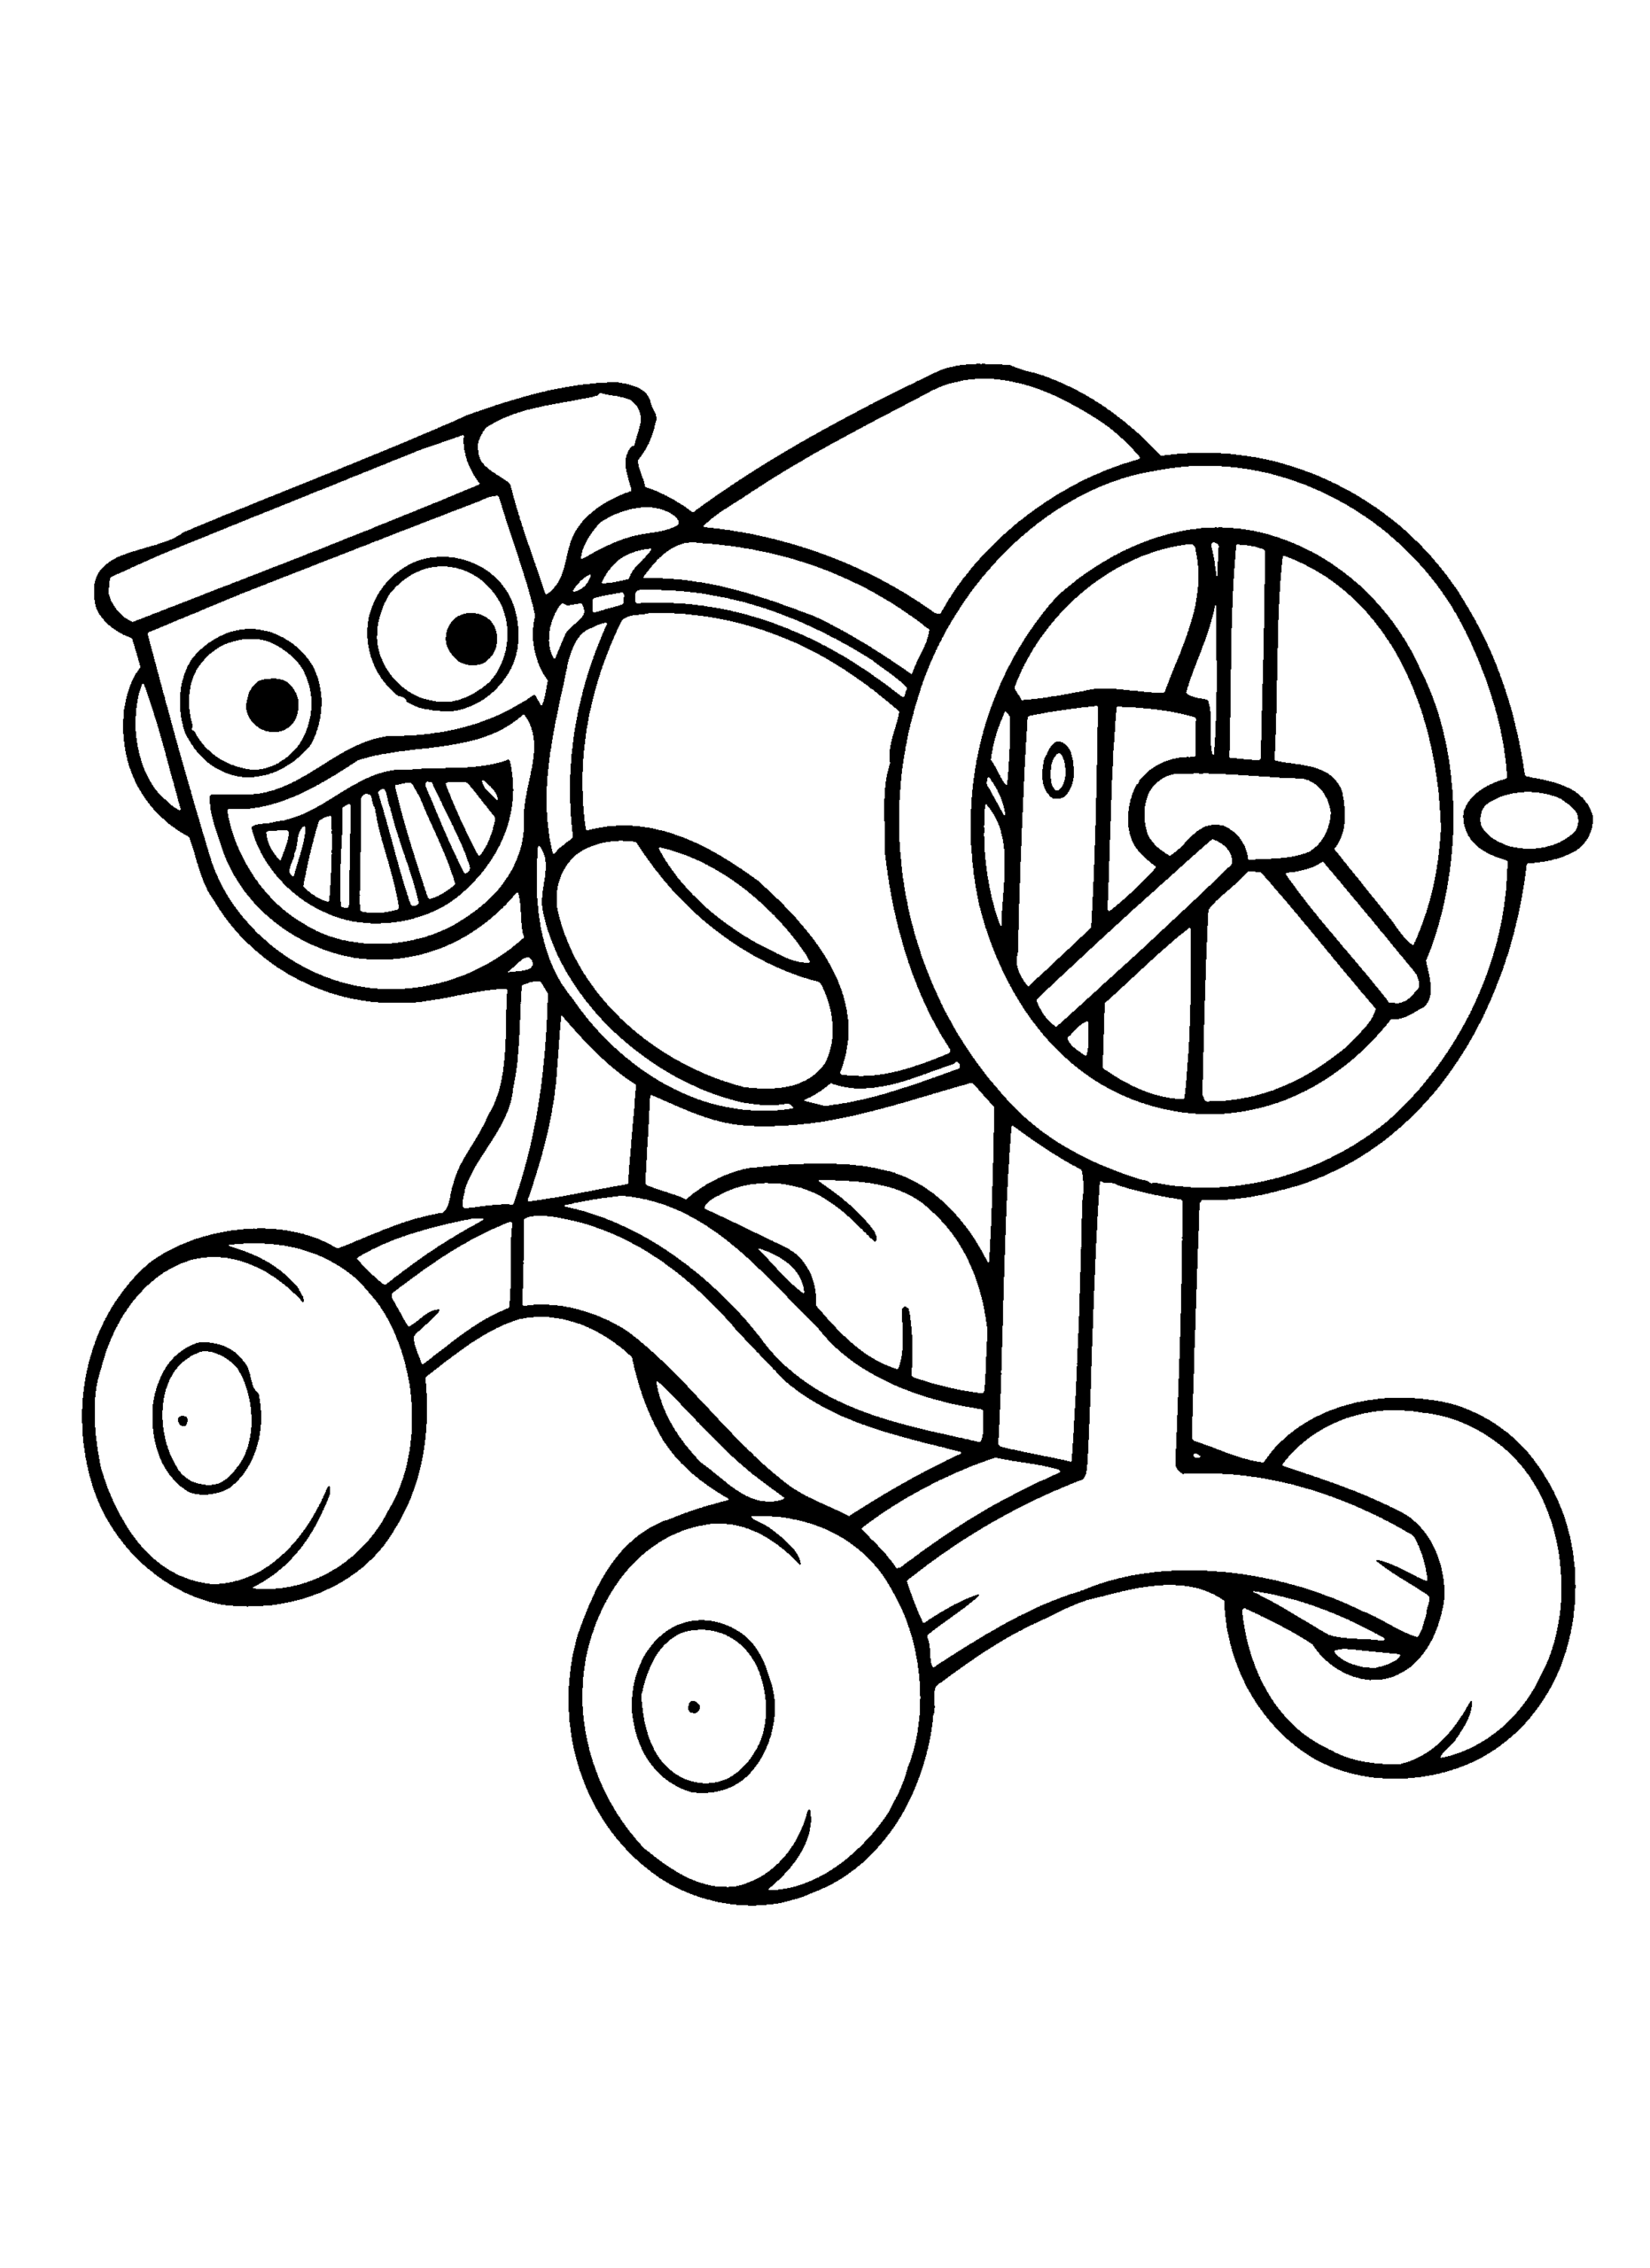 Bob the Builder Coloring Pages TV Film bob der baumeister Printable 2020 00938 Coloring4free